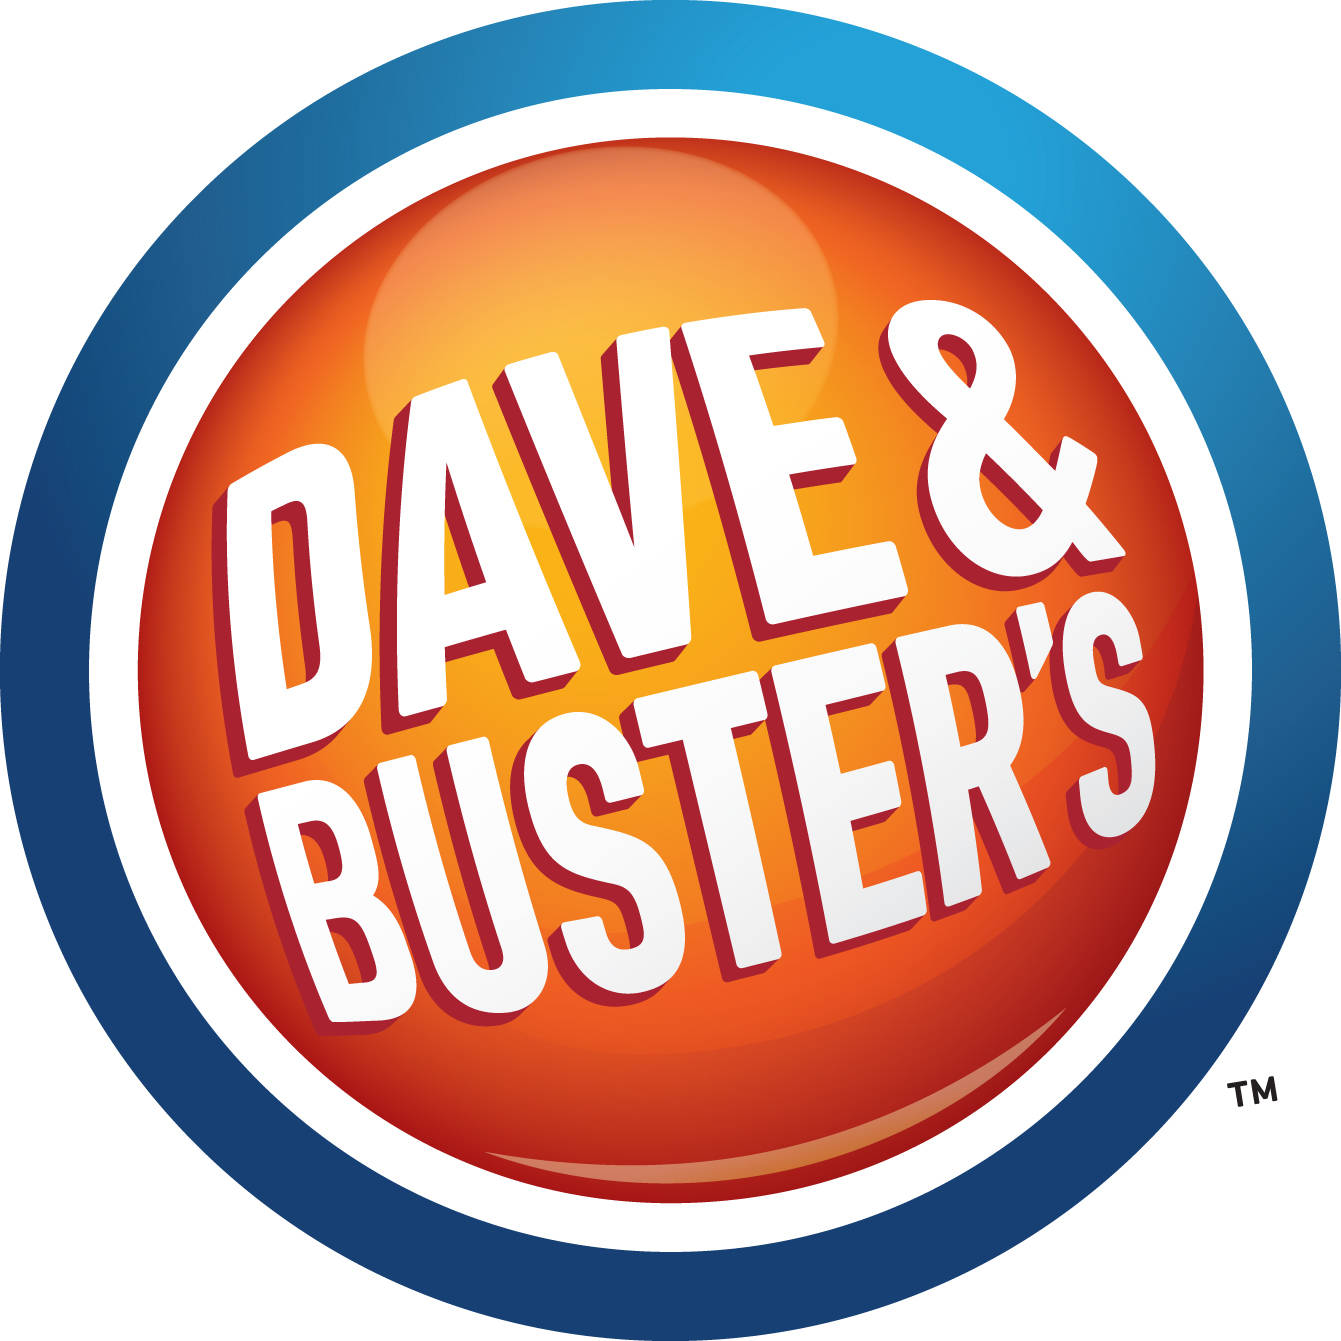 Dave & Buster’s hiring for new location in Auburn